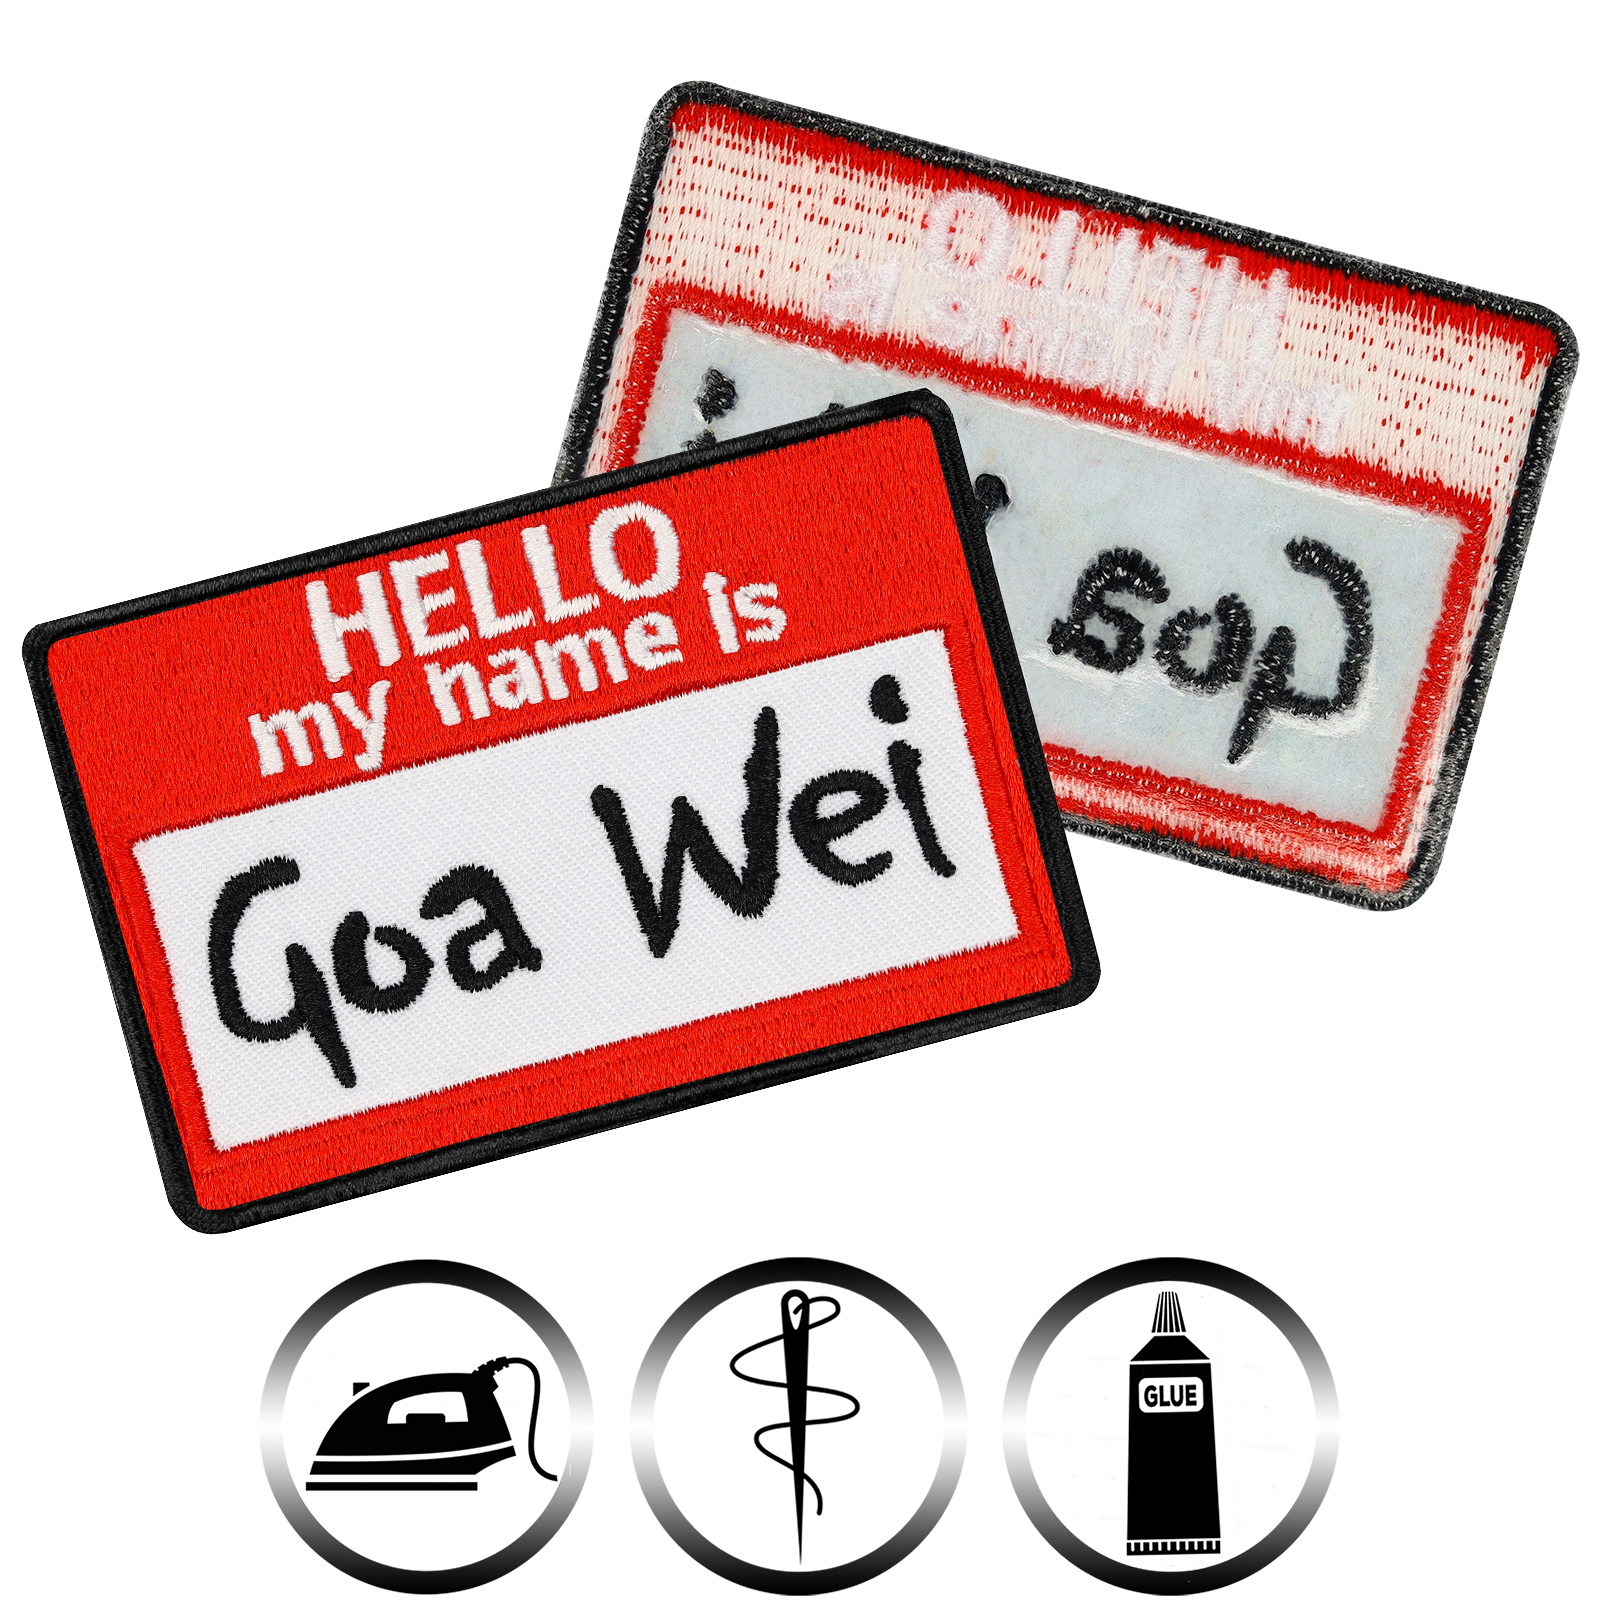 Hello, my name is... Goa wei - Patch